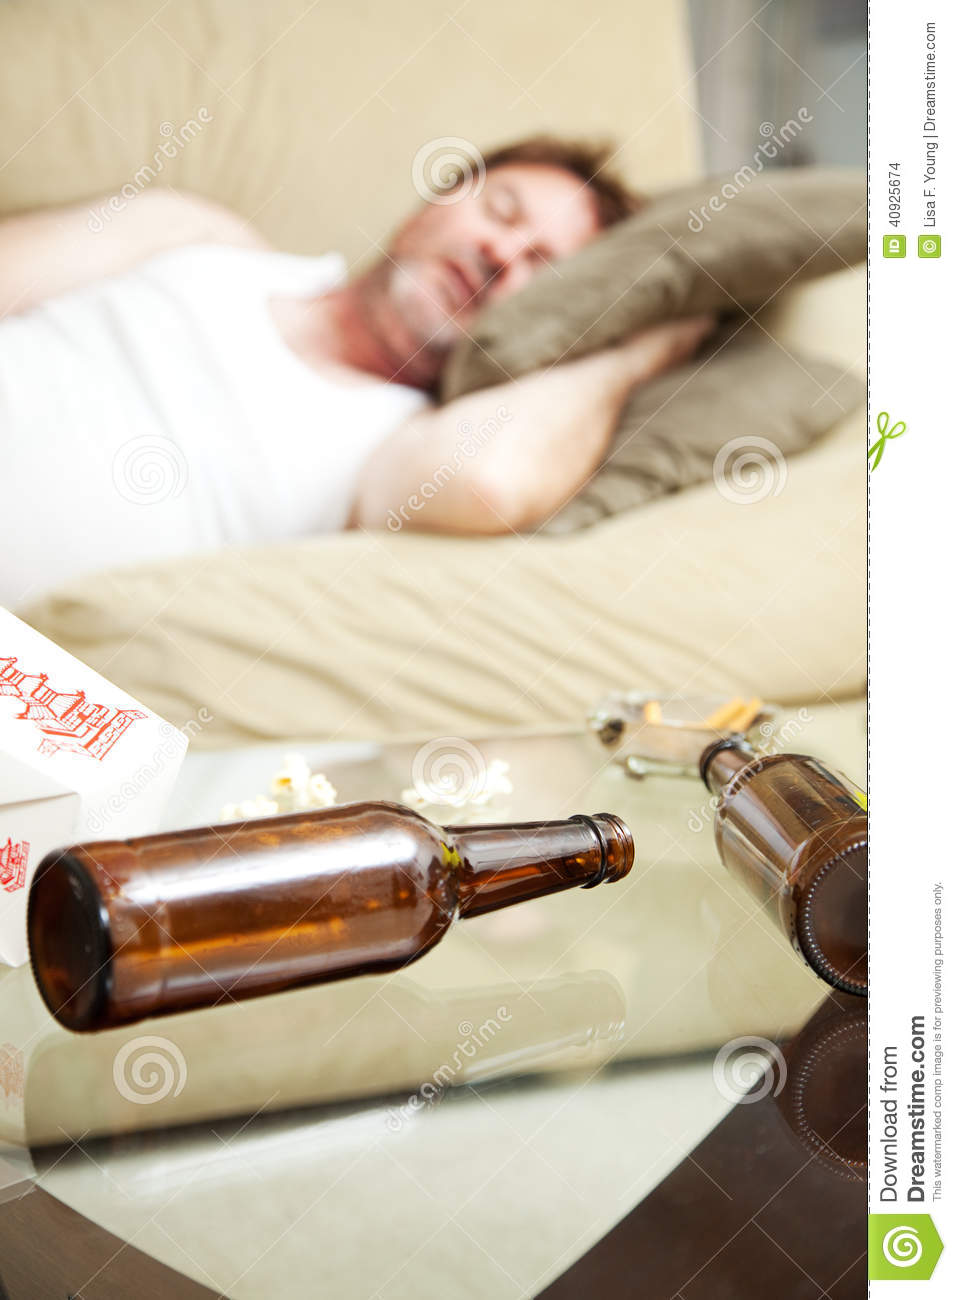 Man Asleep On The Couch With Ashtray Takeout Food Container And Beer    